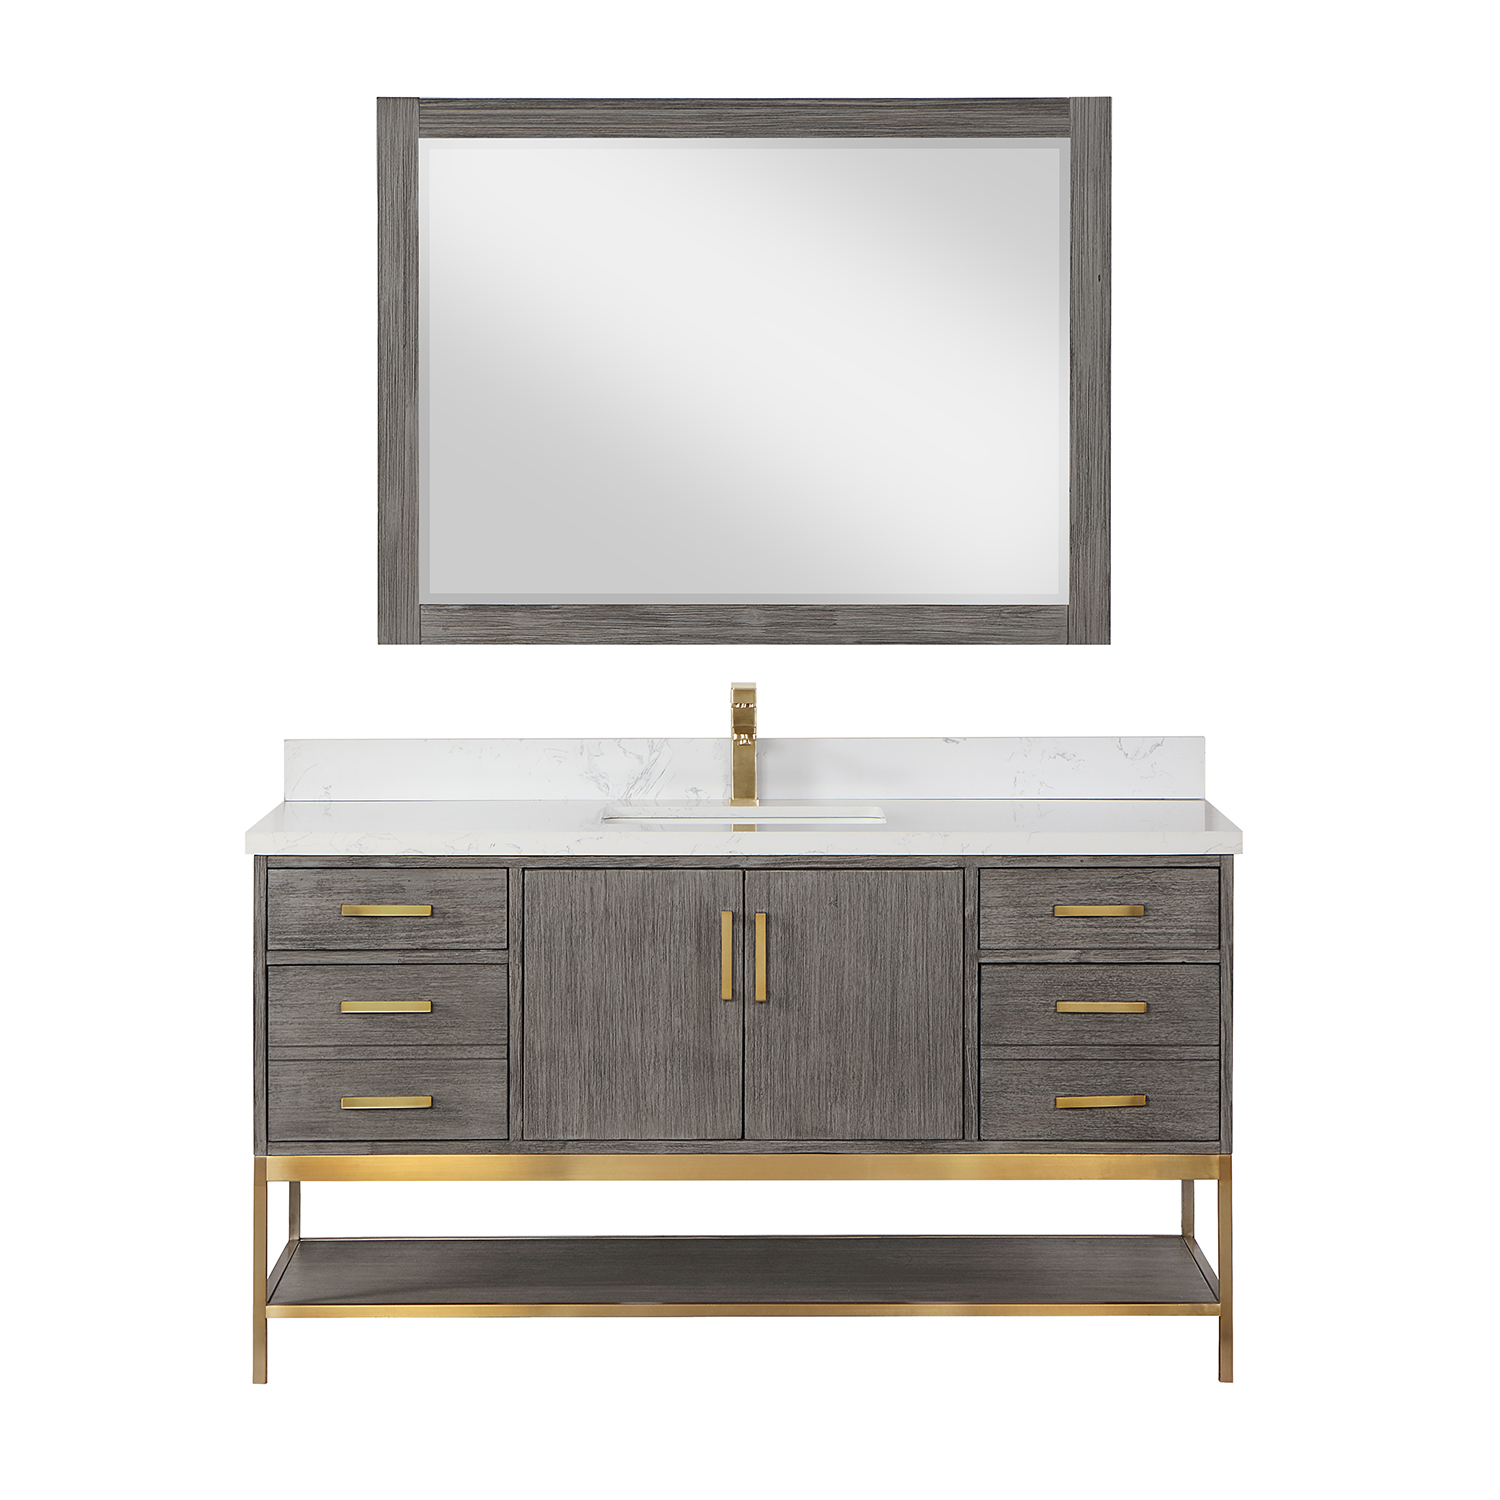 Issac Edwards Collection 60" Single Bathroom Vanity Set in Classical Grey with Grain White Composite Stone Countertop without Mirror 